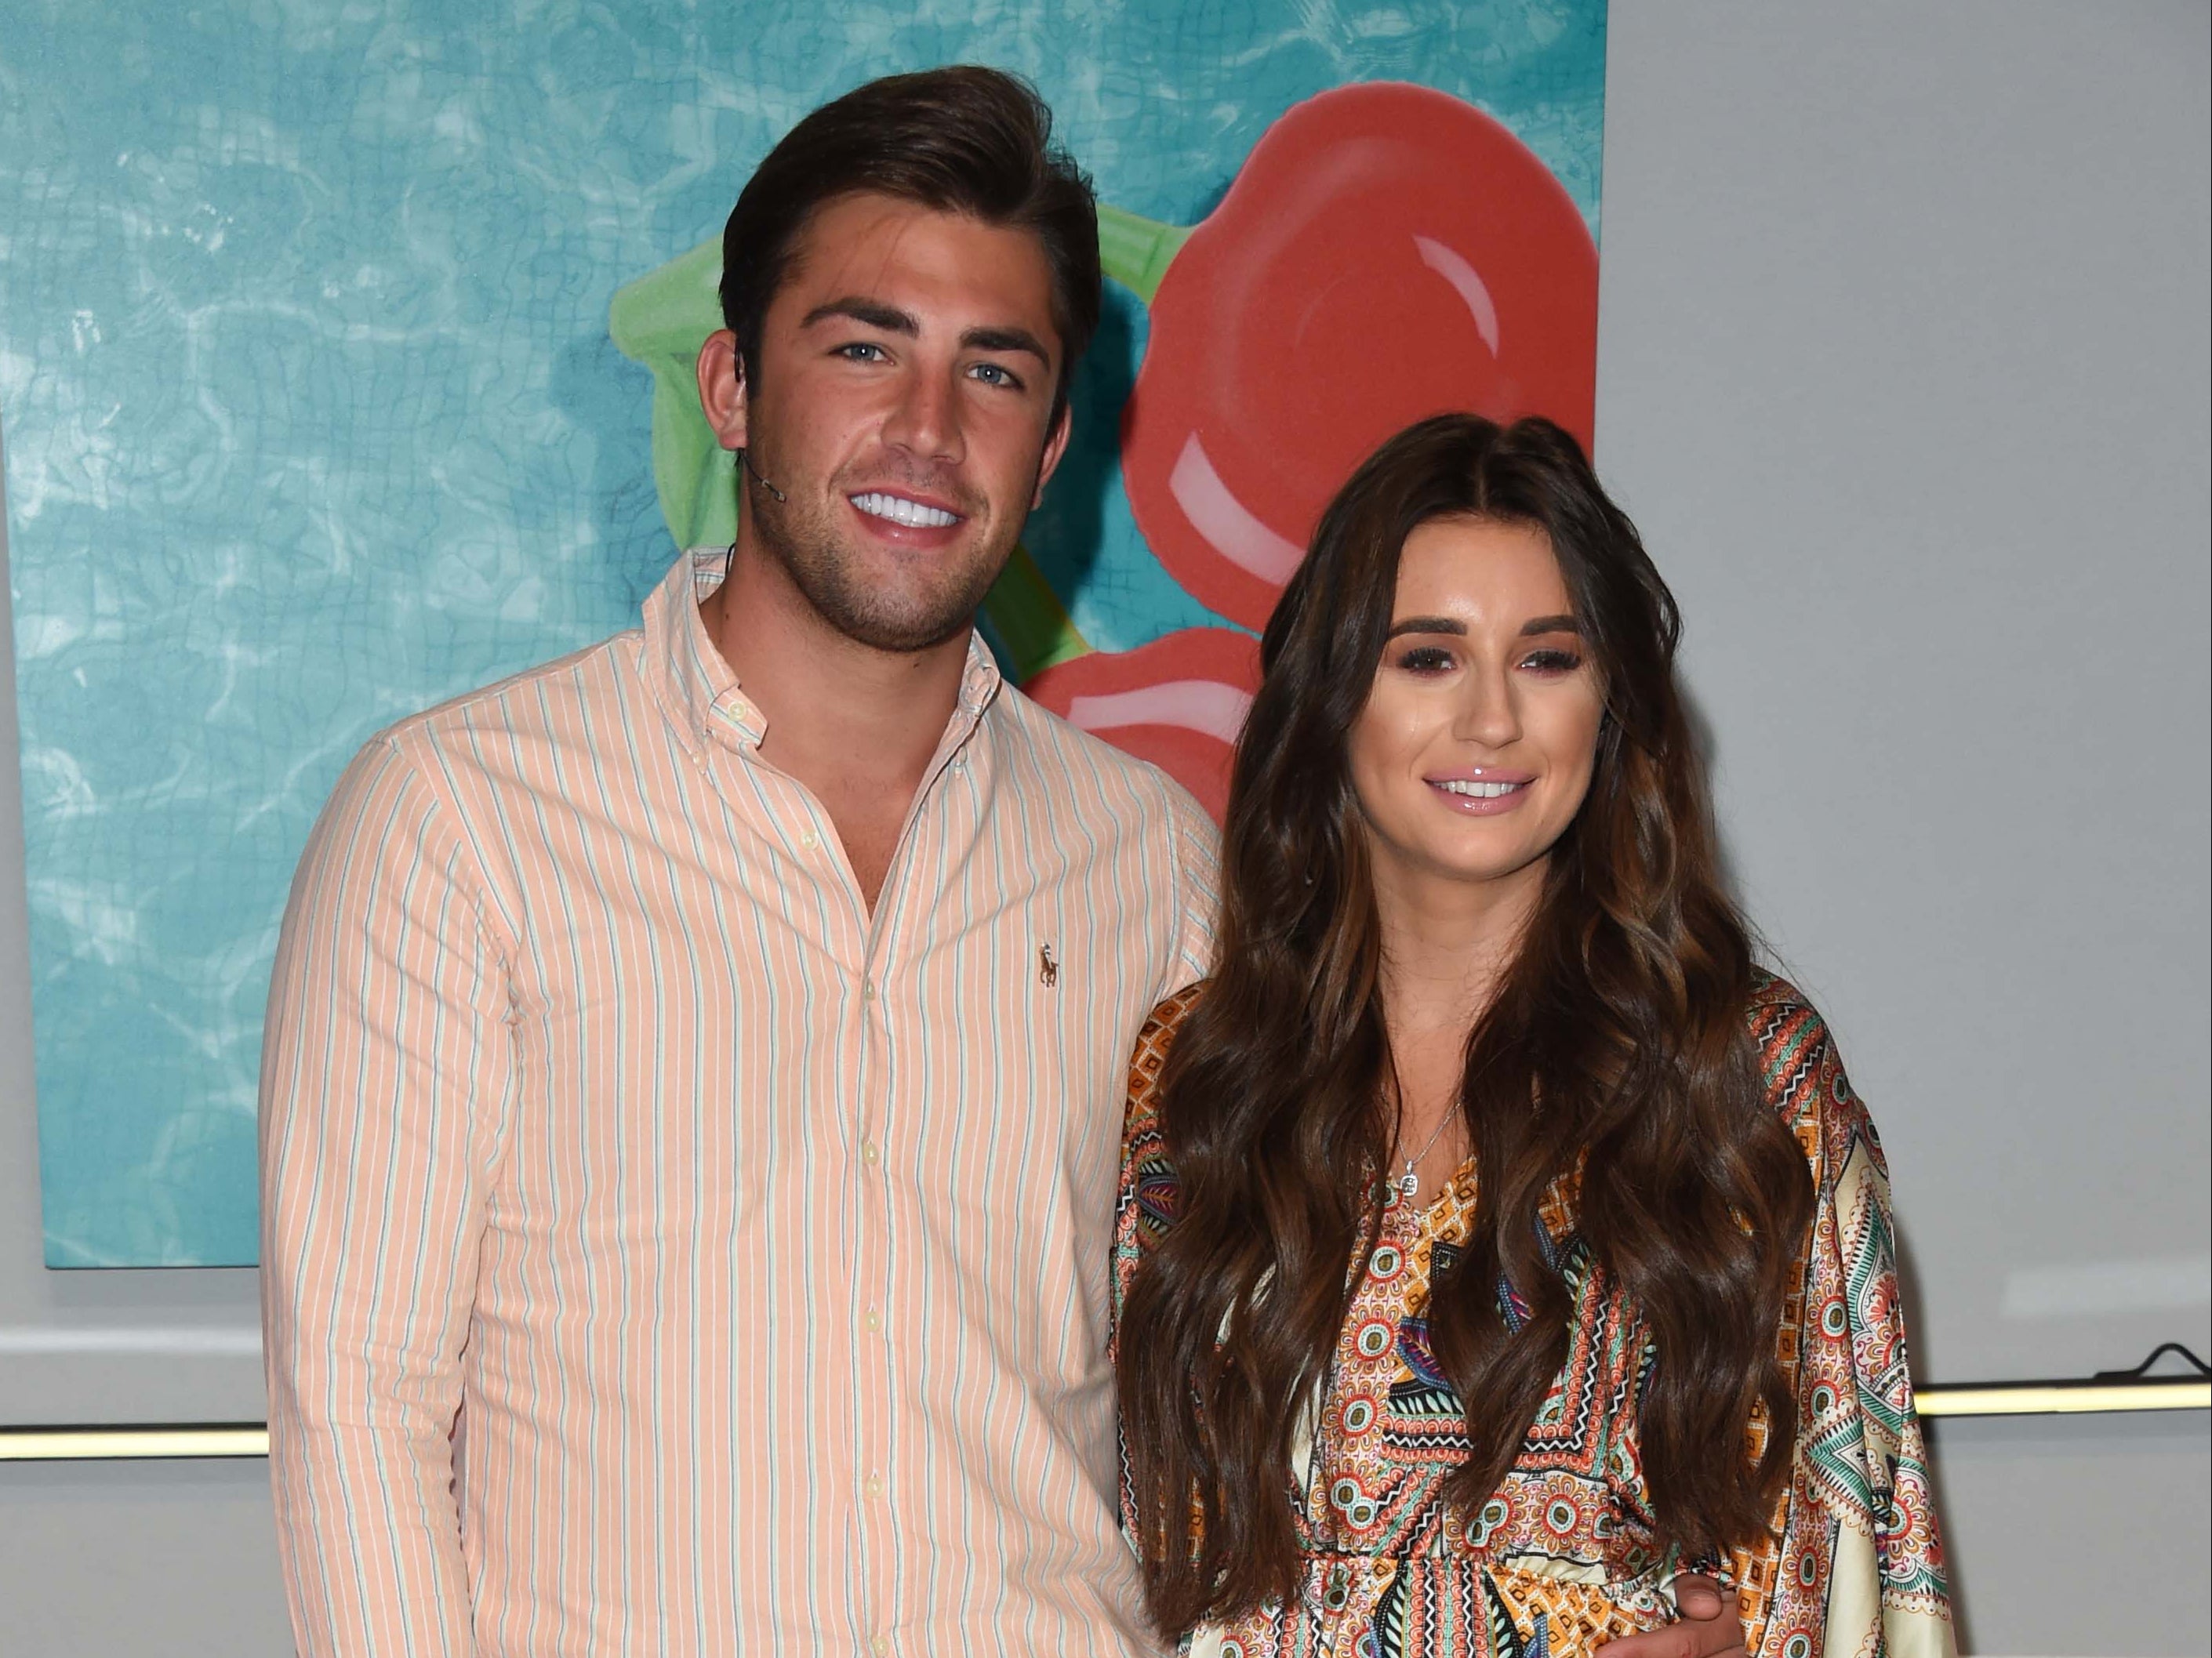 Jack Fincham and Dani Dyer at a ‘Love Island’ photocall